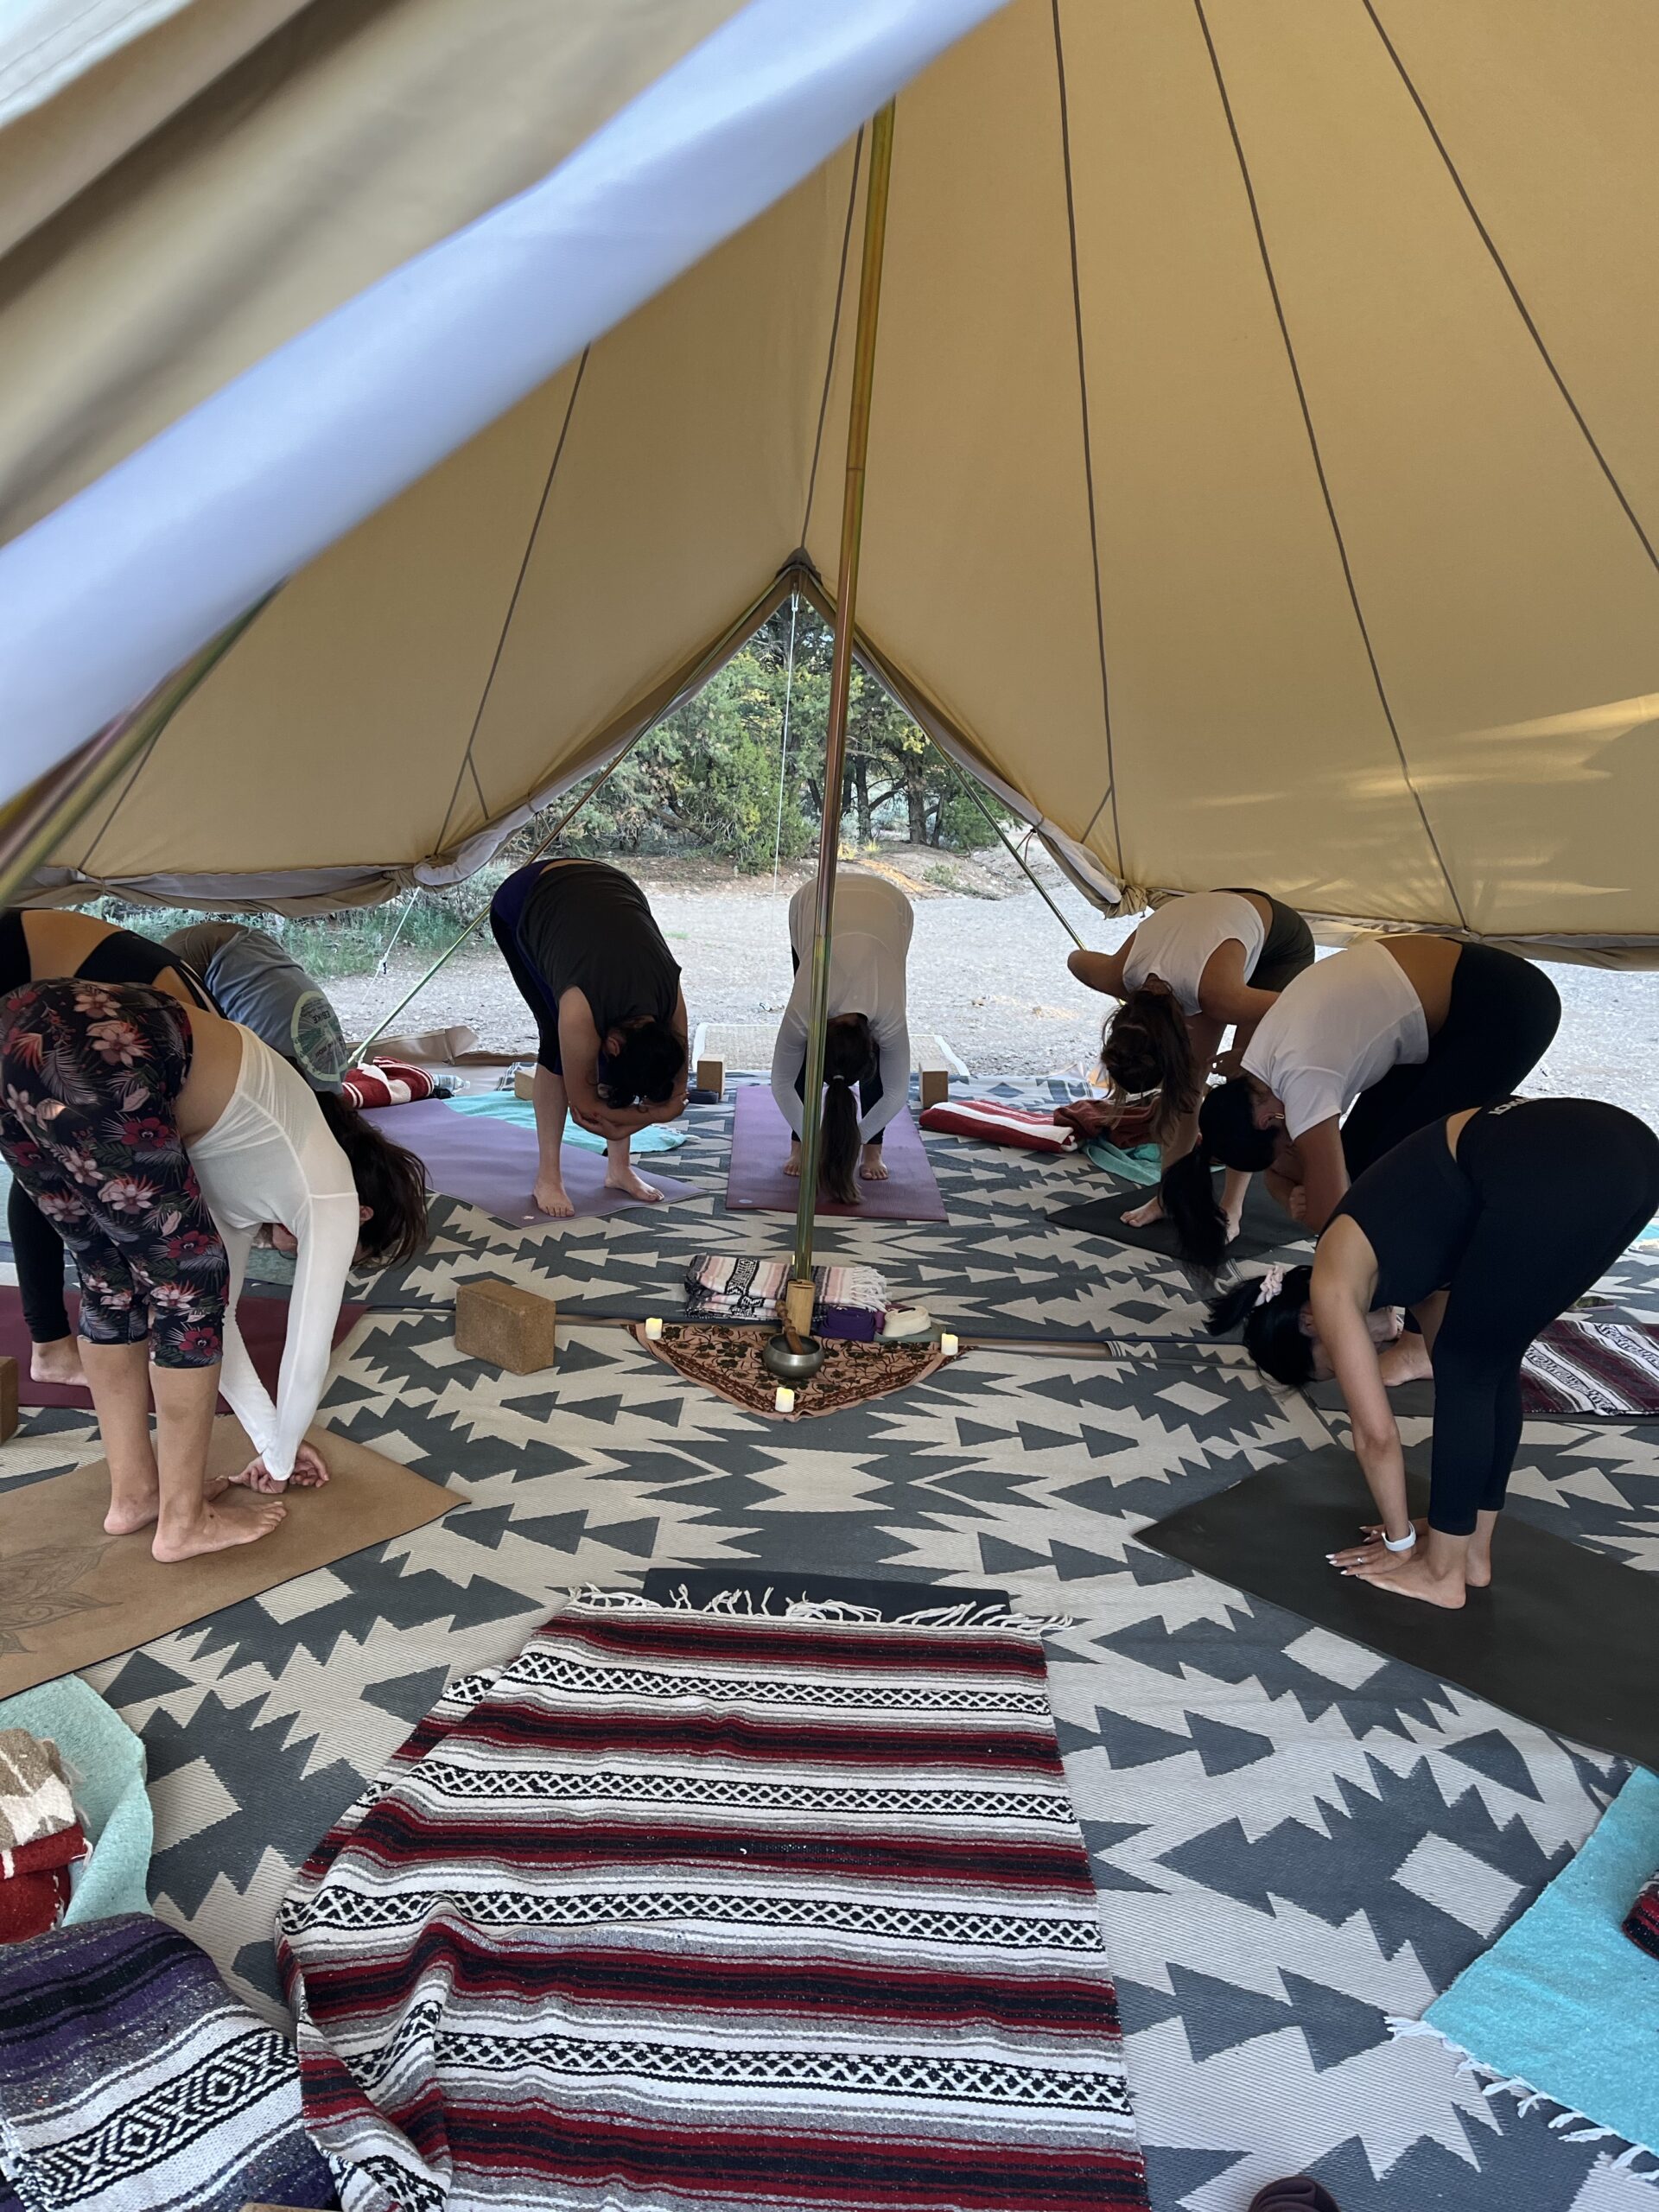 Group of women stretching on yoga mats under large white tent